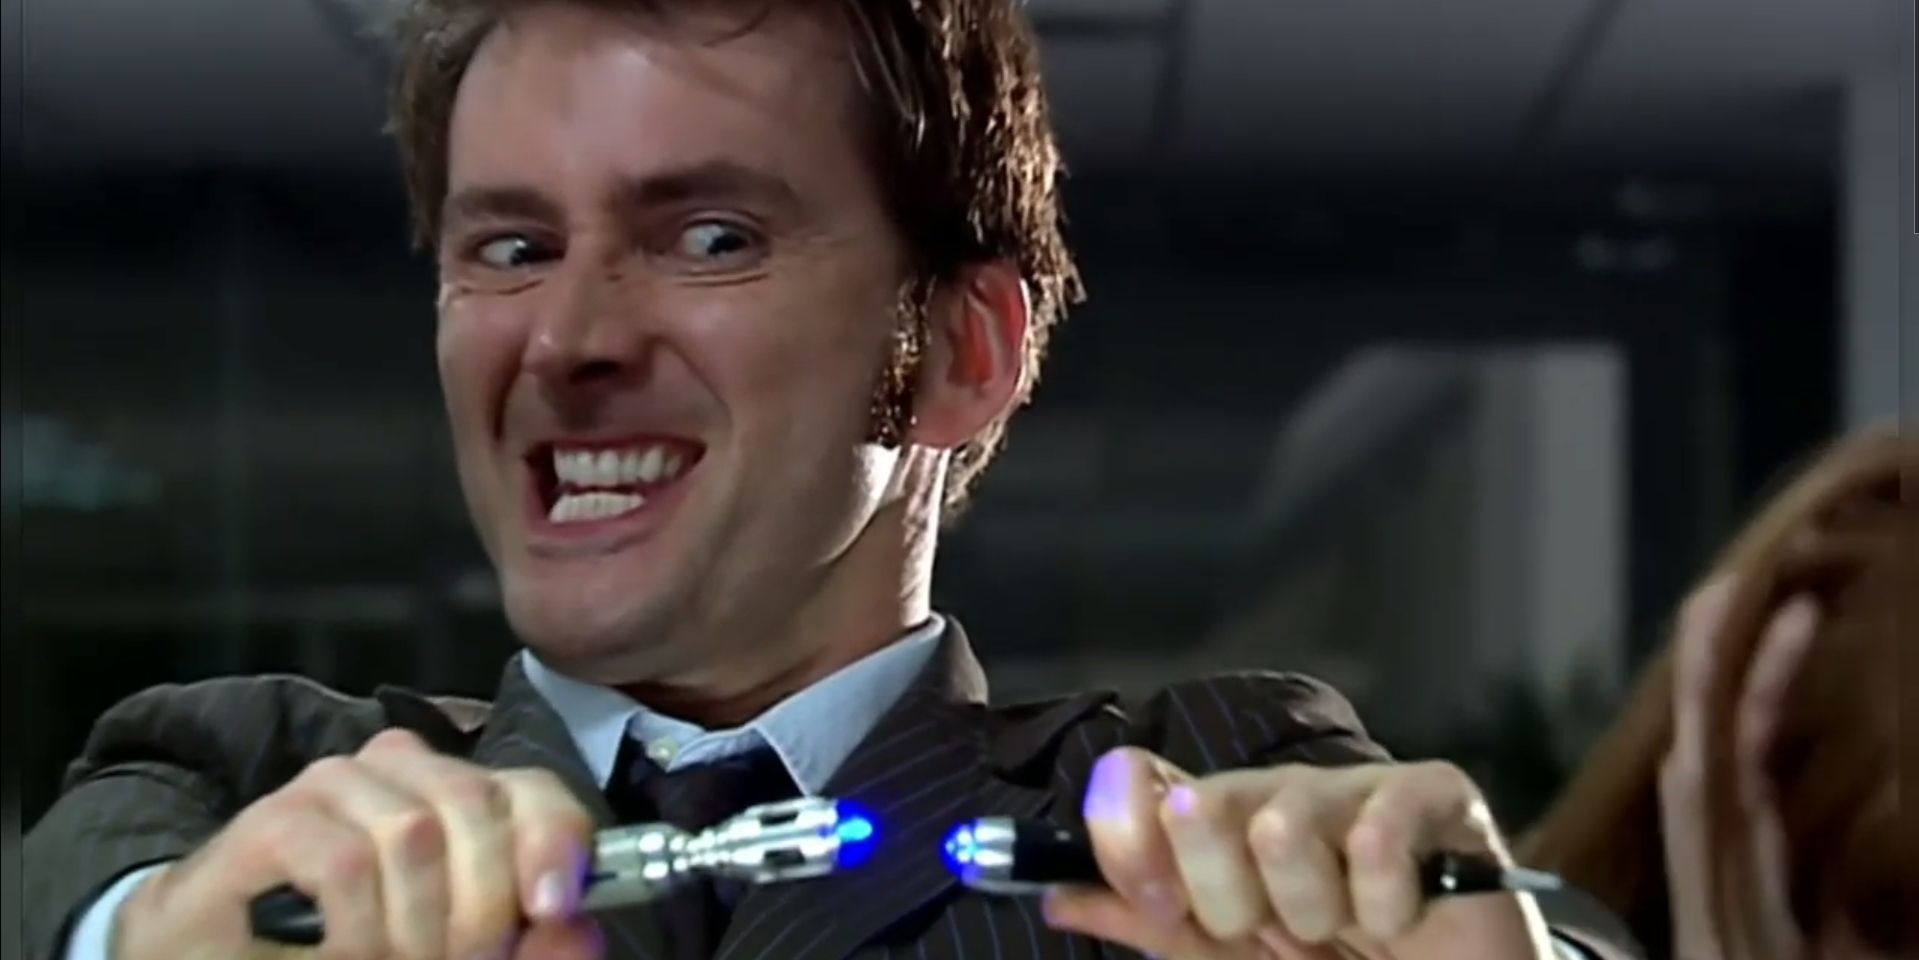 Doctor Who - the 10th Doctor uses the sonic screwdriver and sonic pen